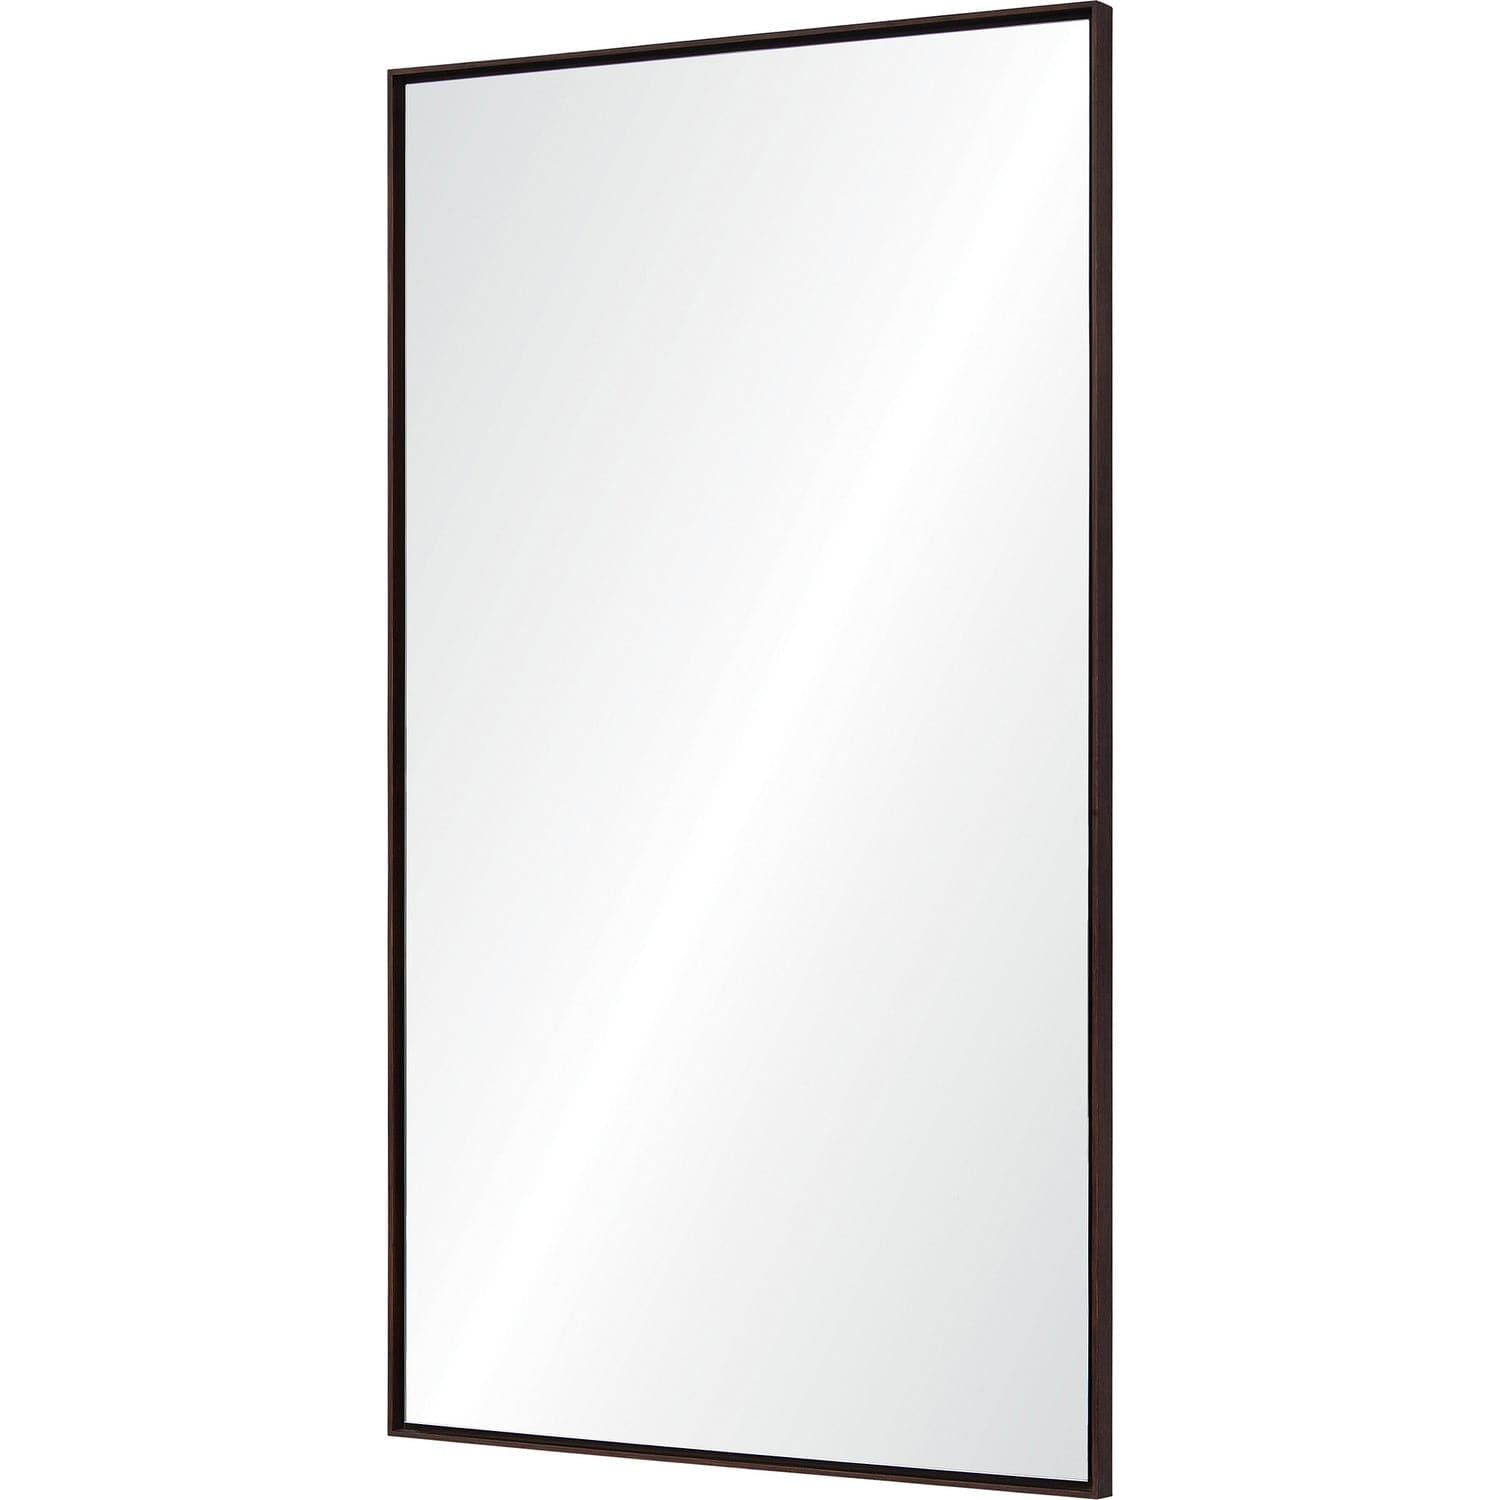 Renwil - MT2148 - Mirrors/Pictures - Mirrors-Rect./Sq.